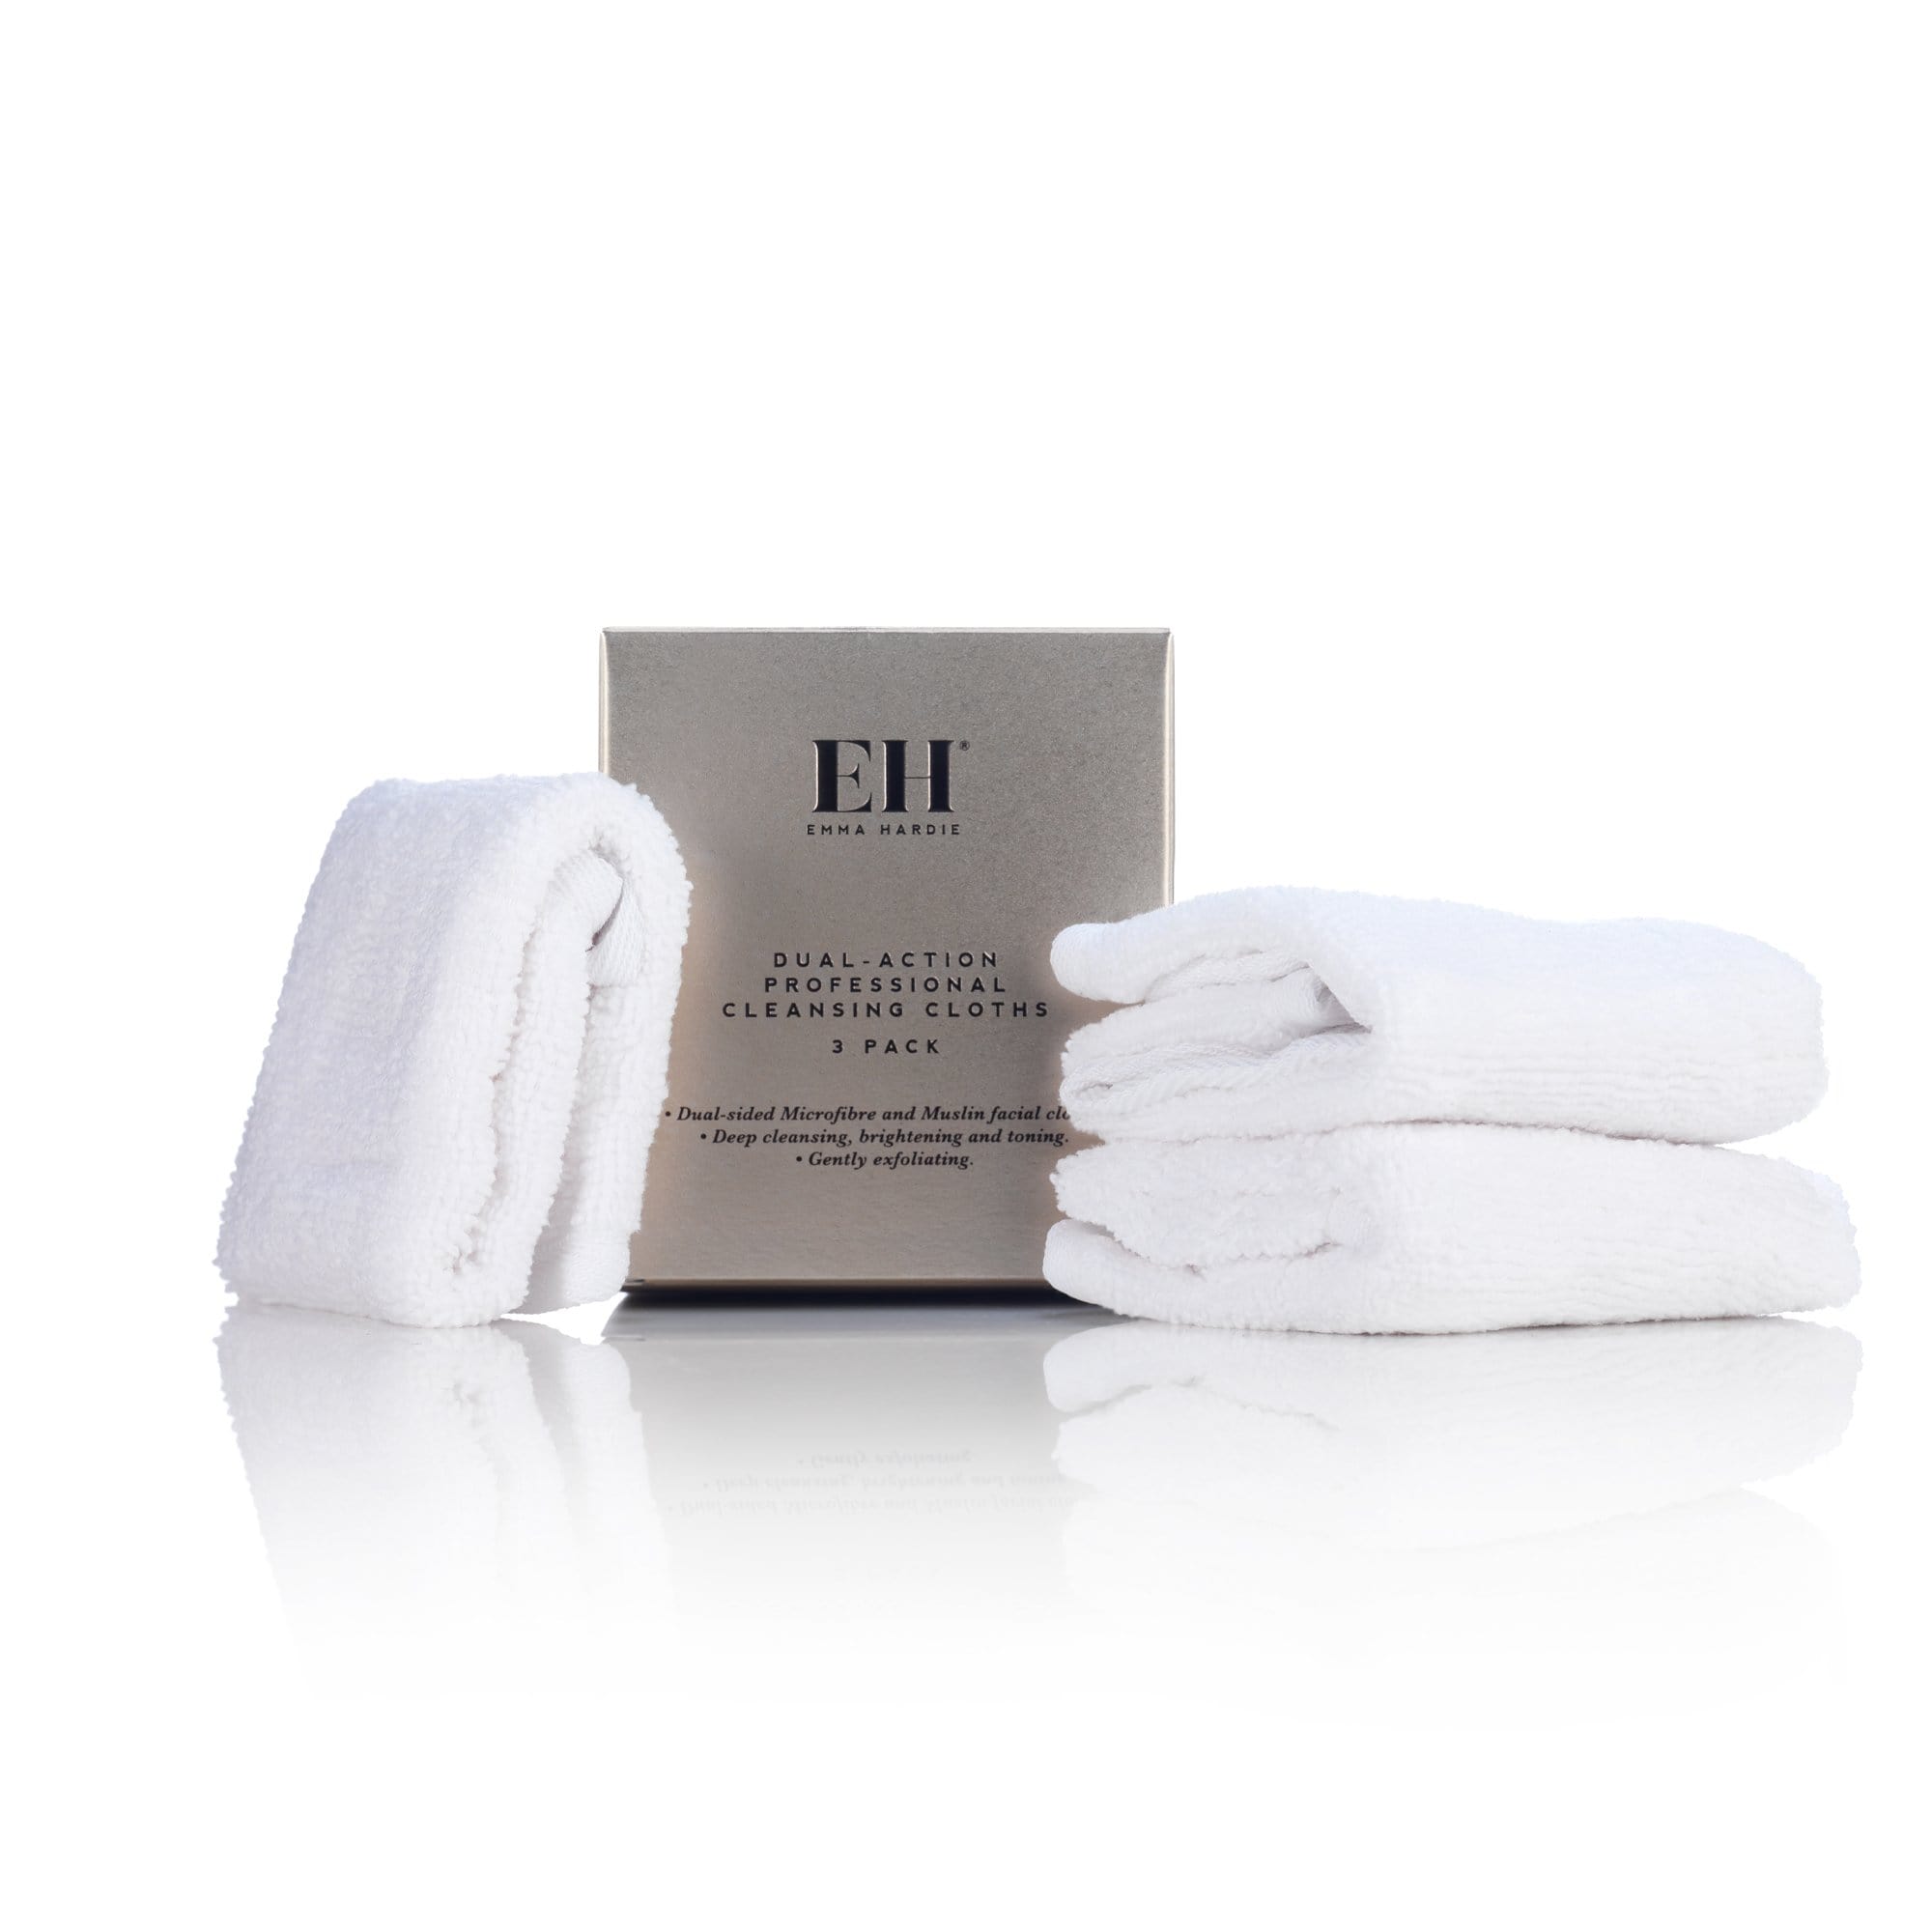 Dual Action Professional Cleansing Cloths Emma Hardie Paños Limpiadores